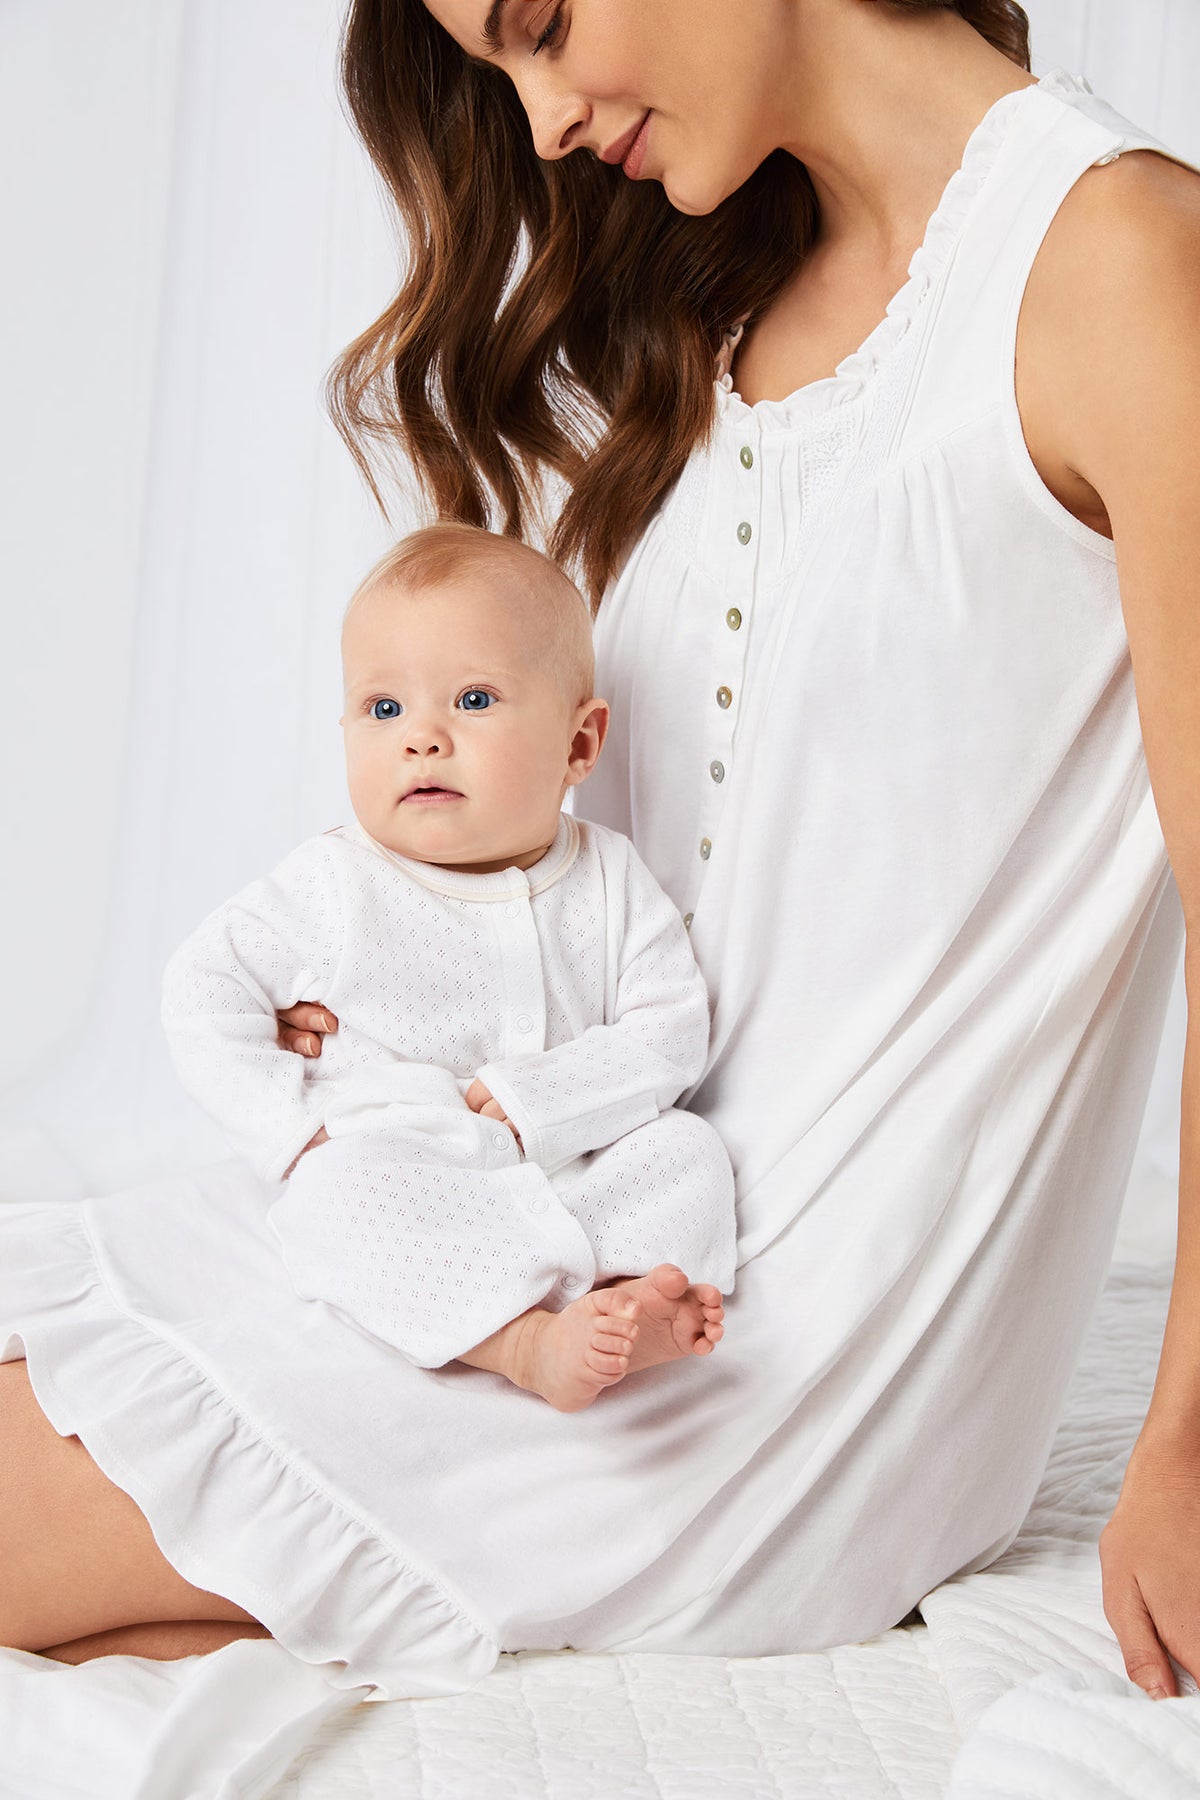 A lady wearing white sleeveless short gown and a baby with a white dress